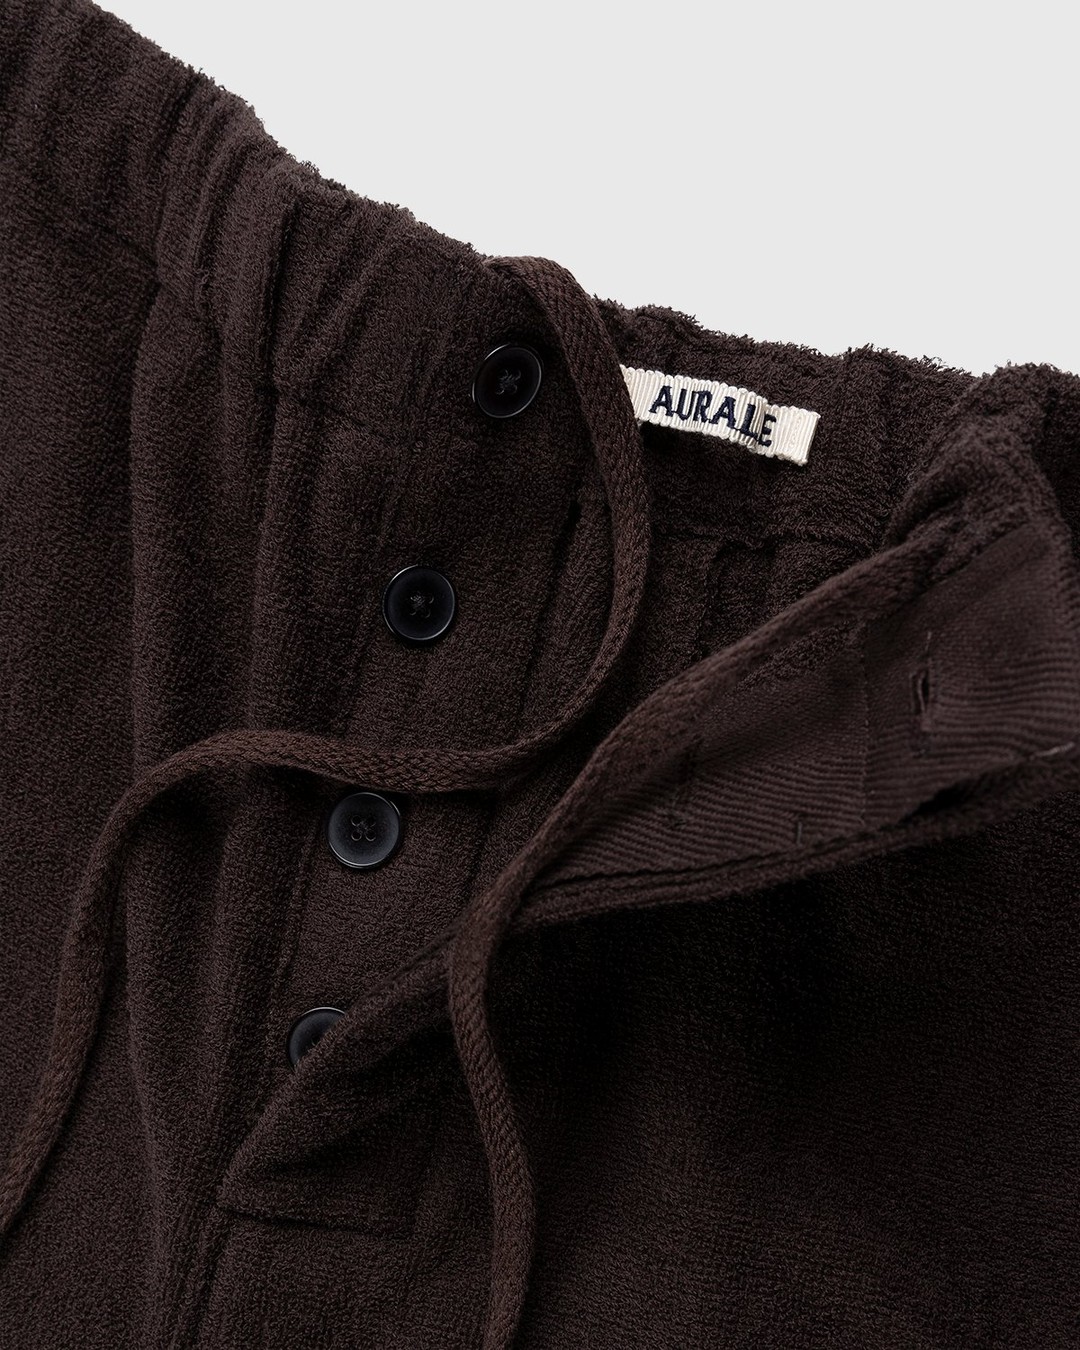 Auralee – Cotton Terry Cloth Shorts Brown - Shorts - Brown - Image 4